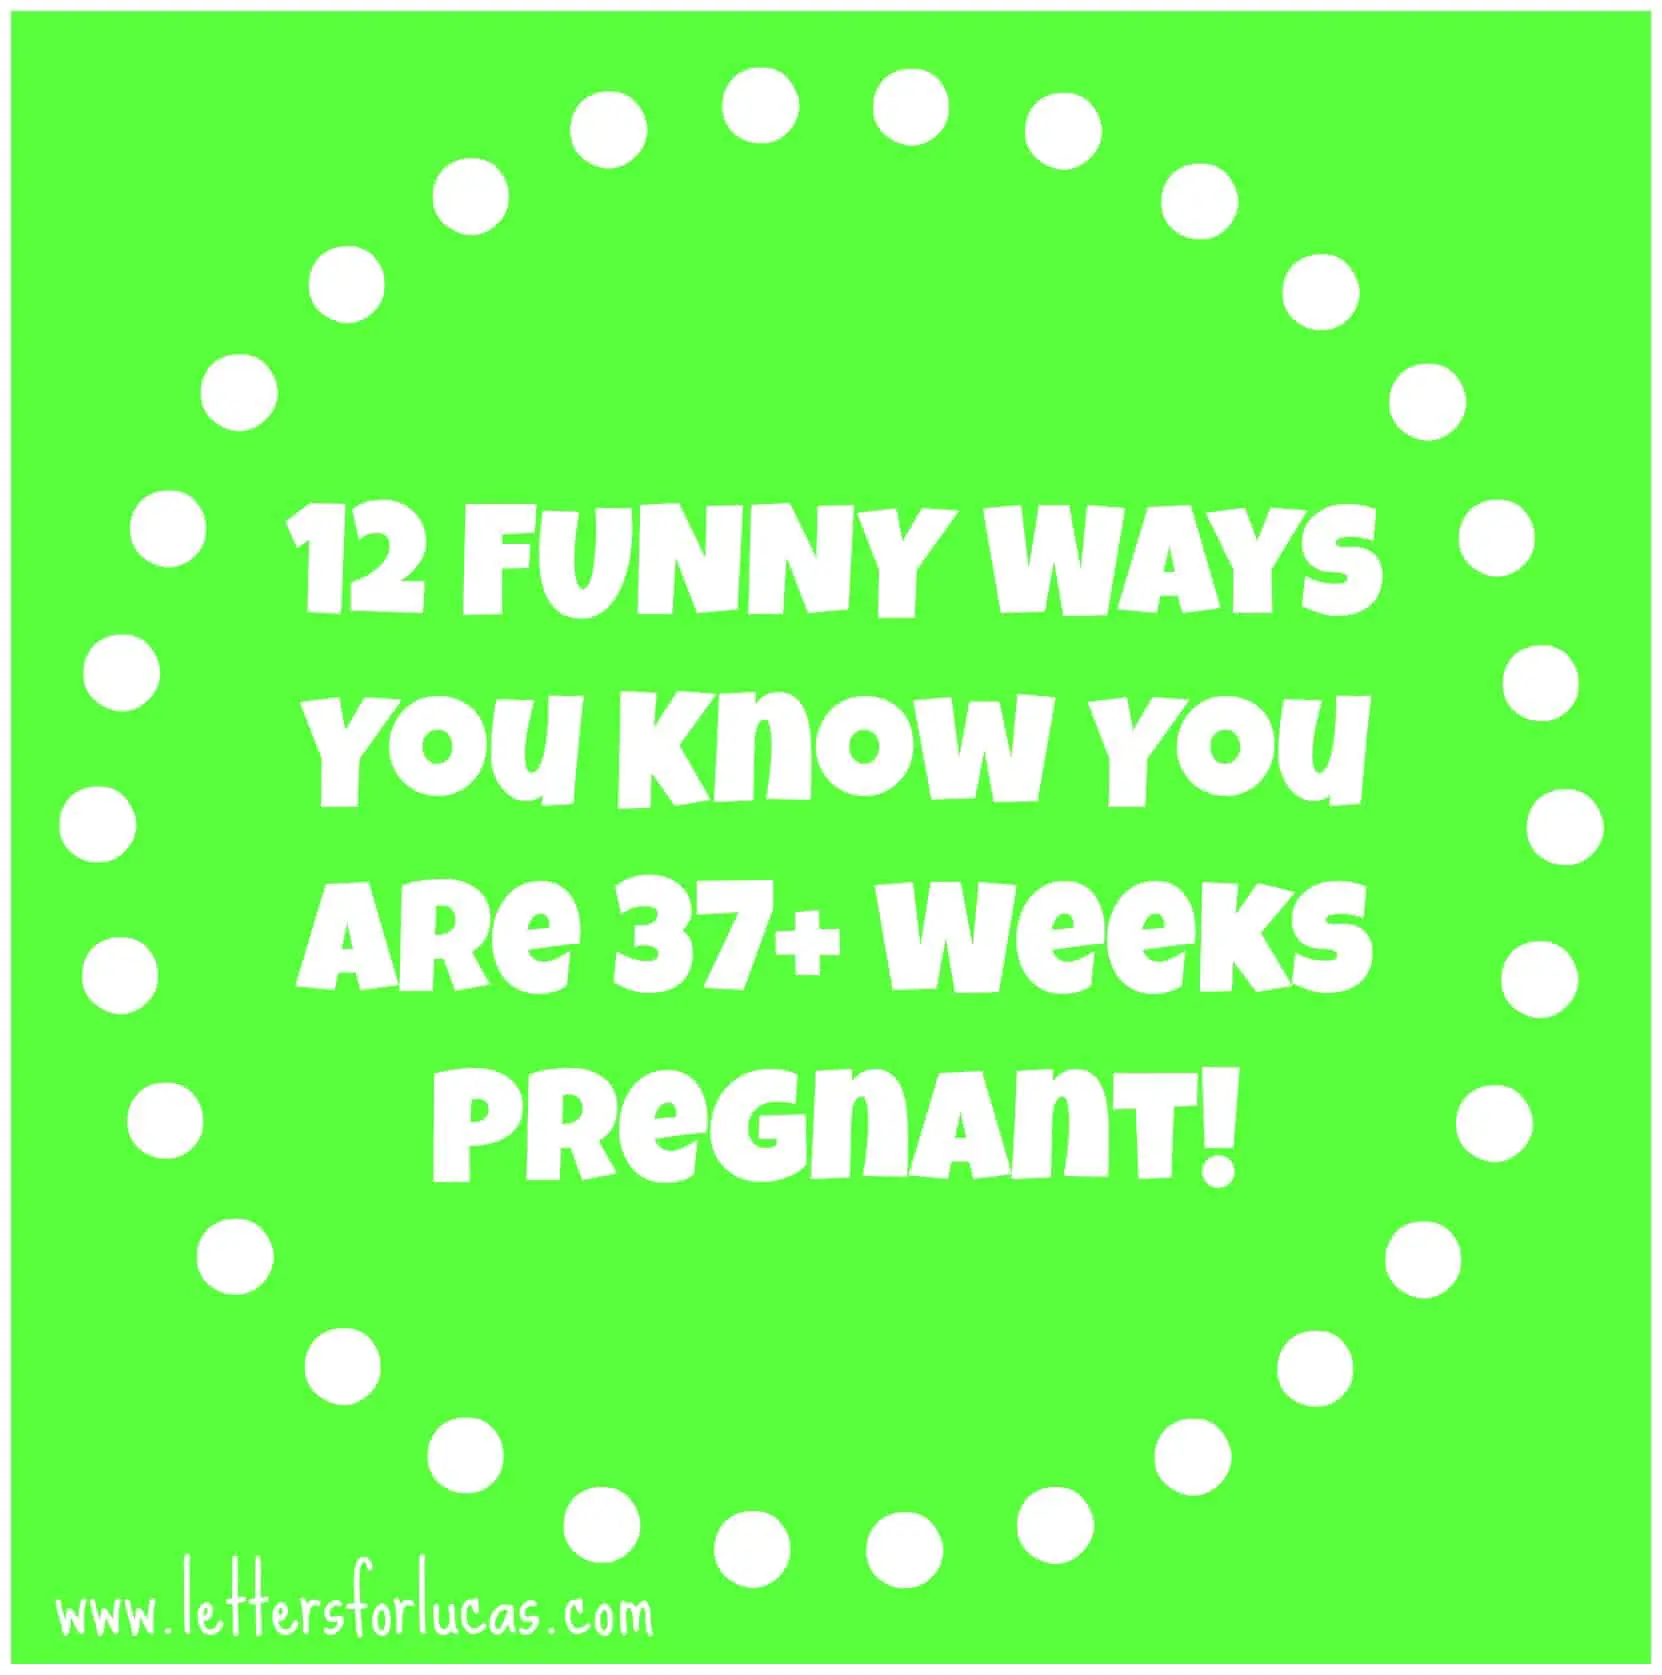 You Know Youâre 37 Weeks Pregnant Whenâ¦